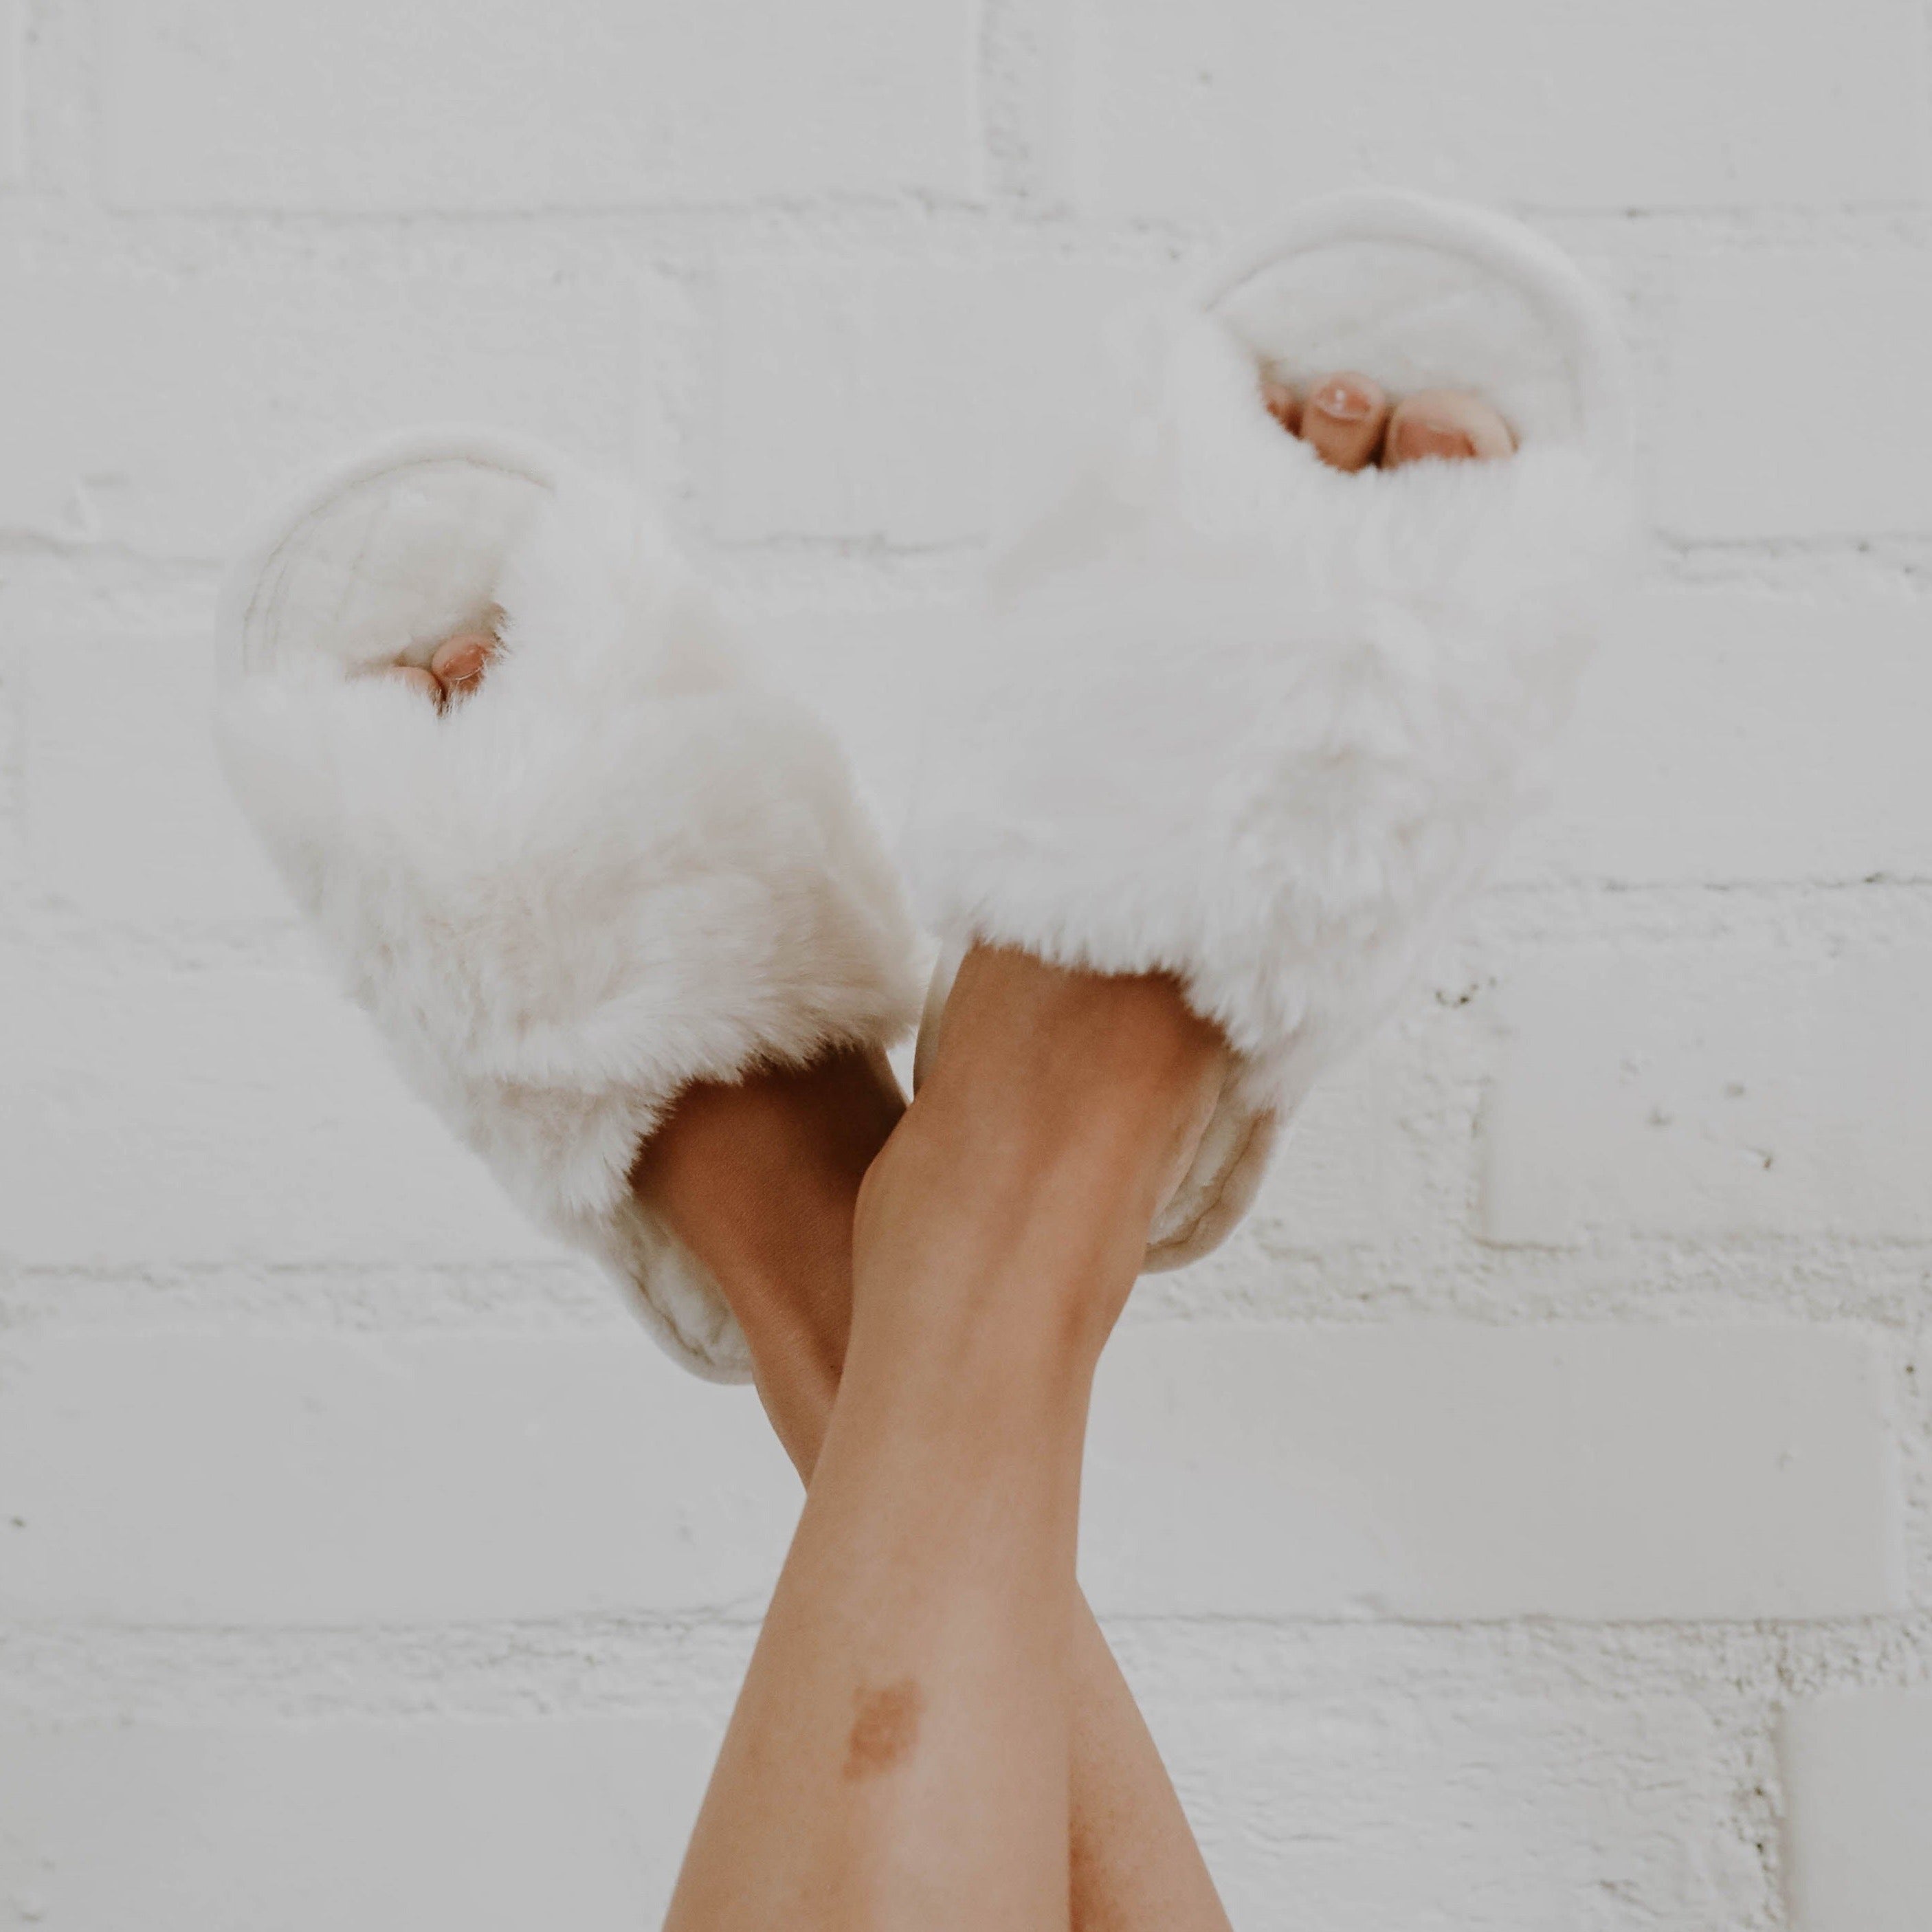 A girl crossing her legs in the air wearing white fuzzy slippers against a white background